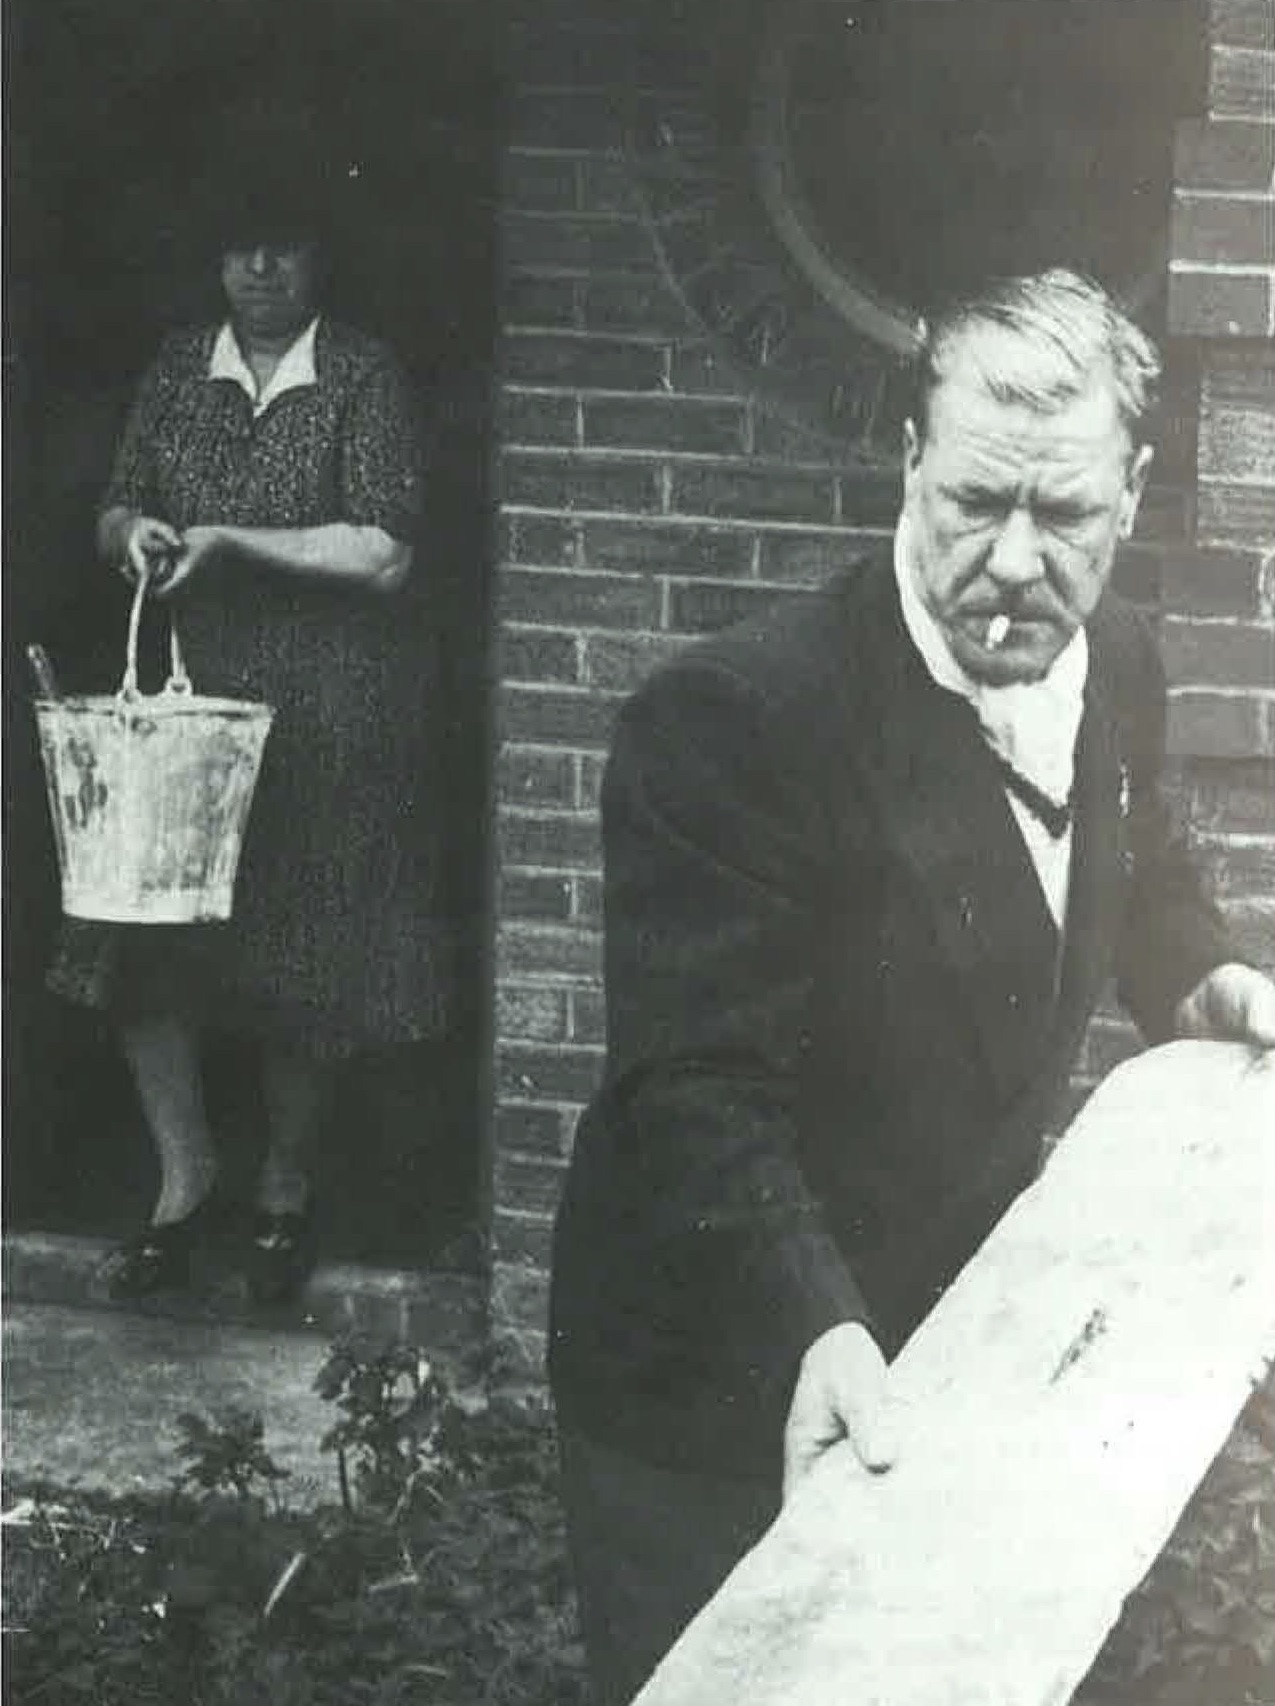 Harriet Cowley helping squat a house and get in ready to rehouse a homeless family (source: QueenSpark Books)